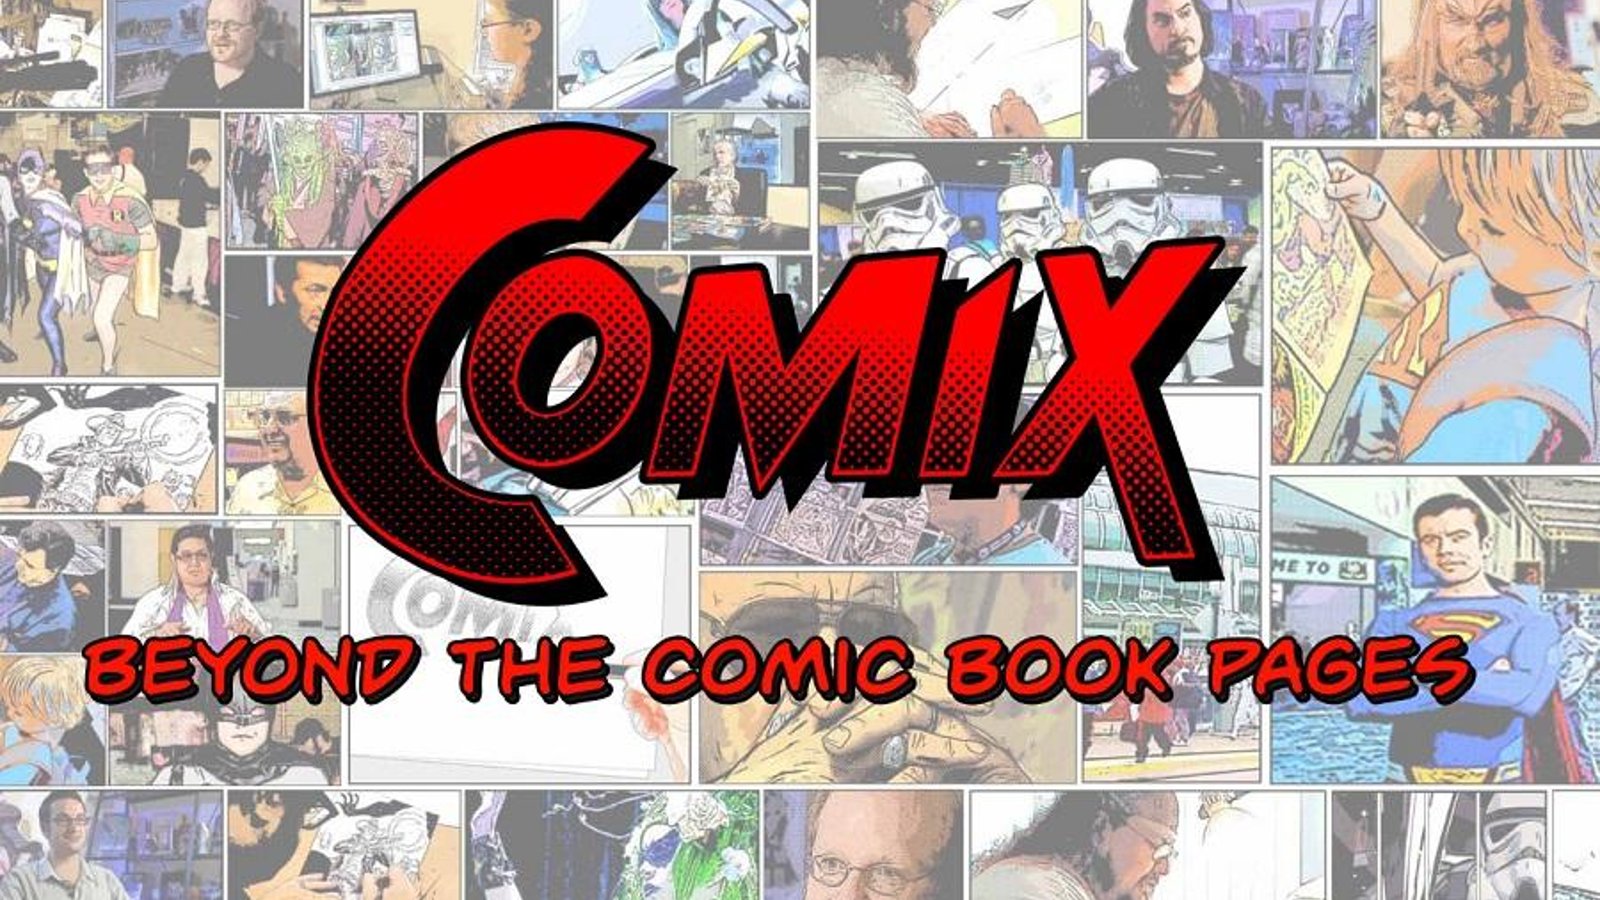 Comix: Beyond the Comic Book Pages - Inside the Comic Book Industry